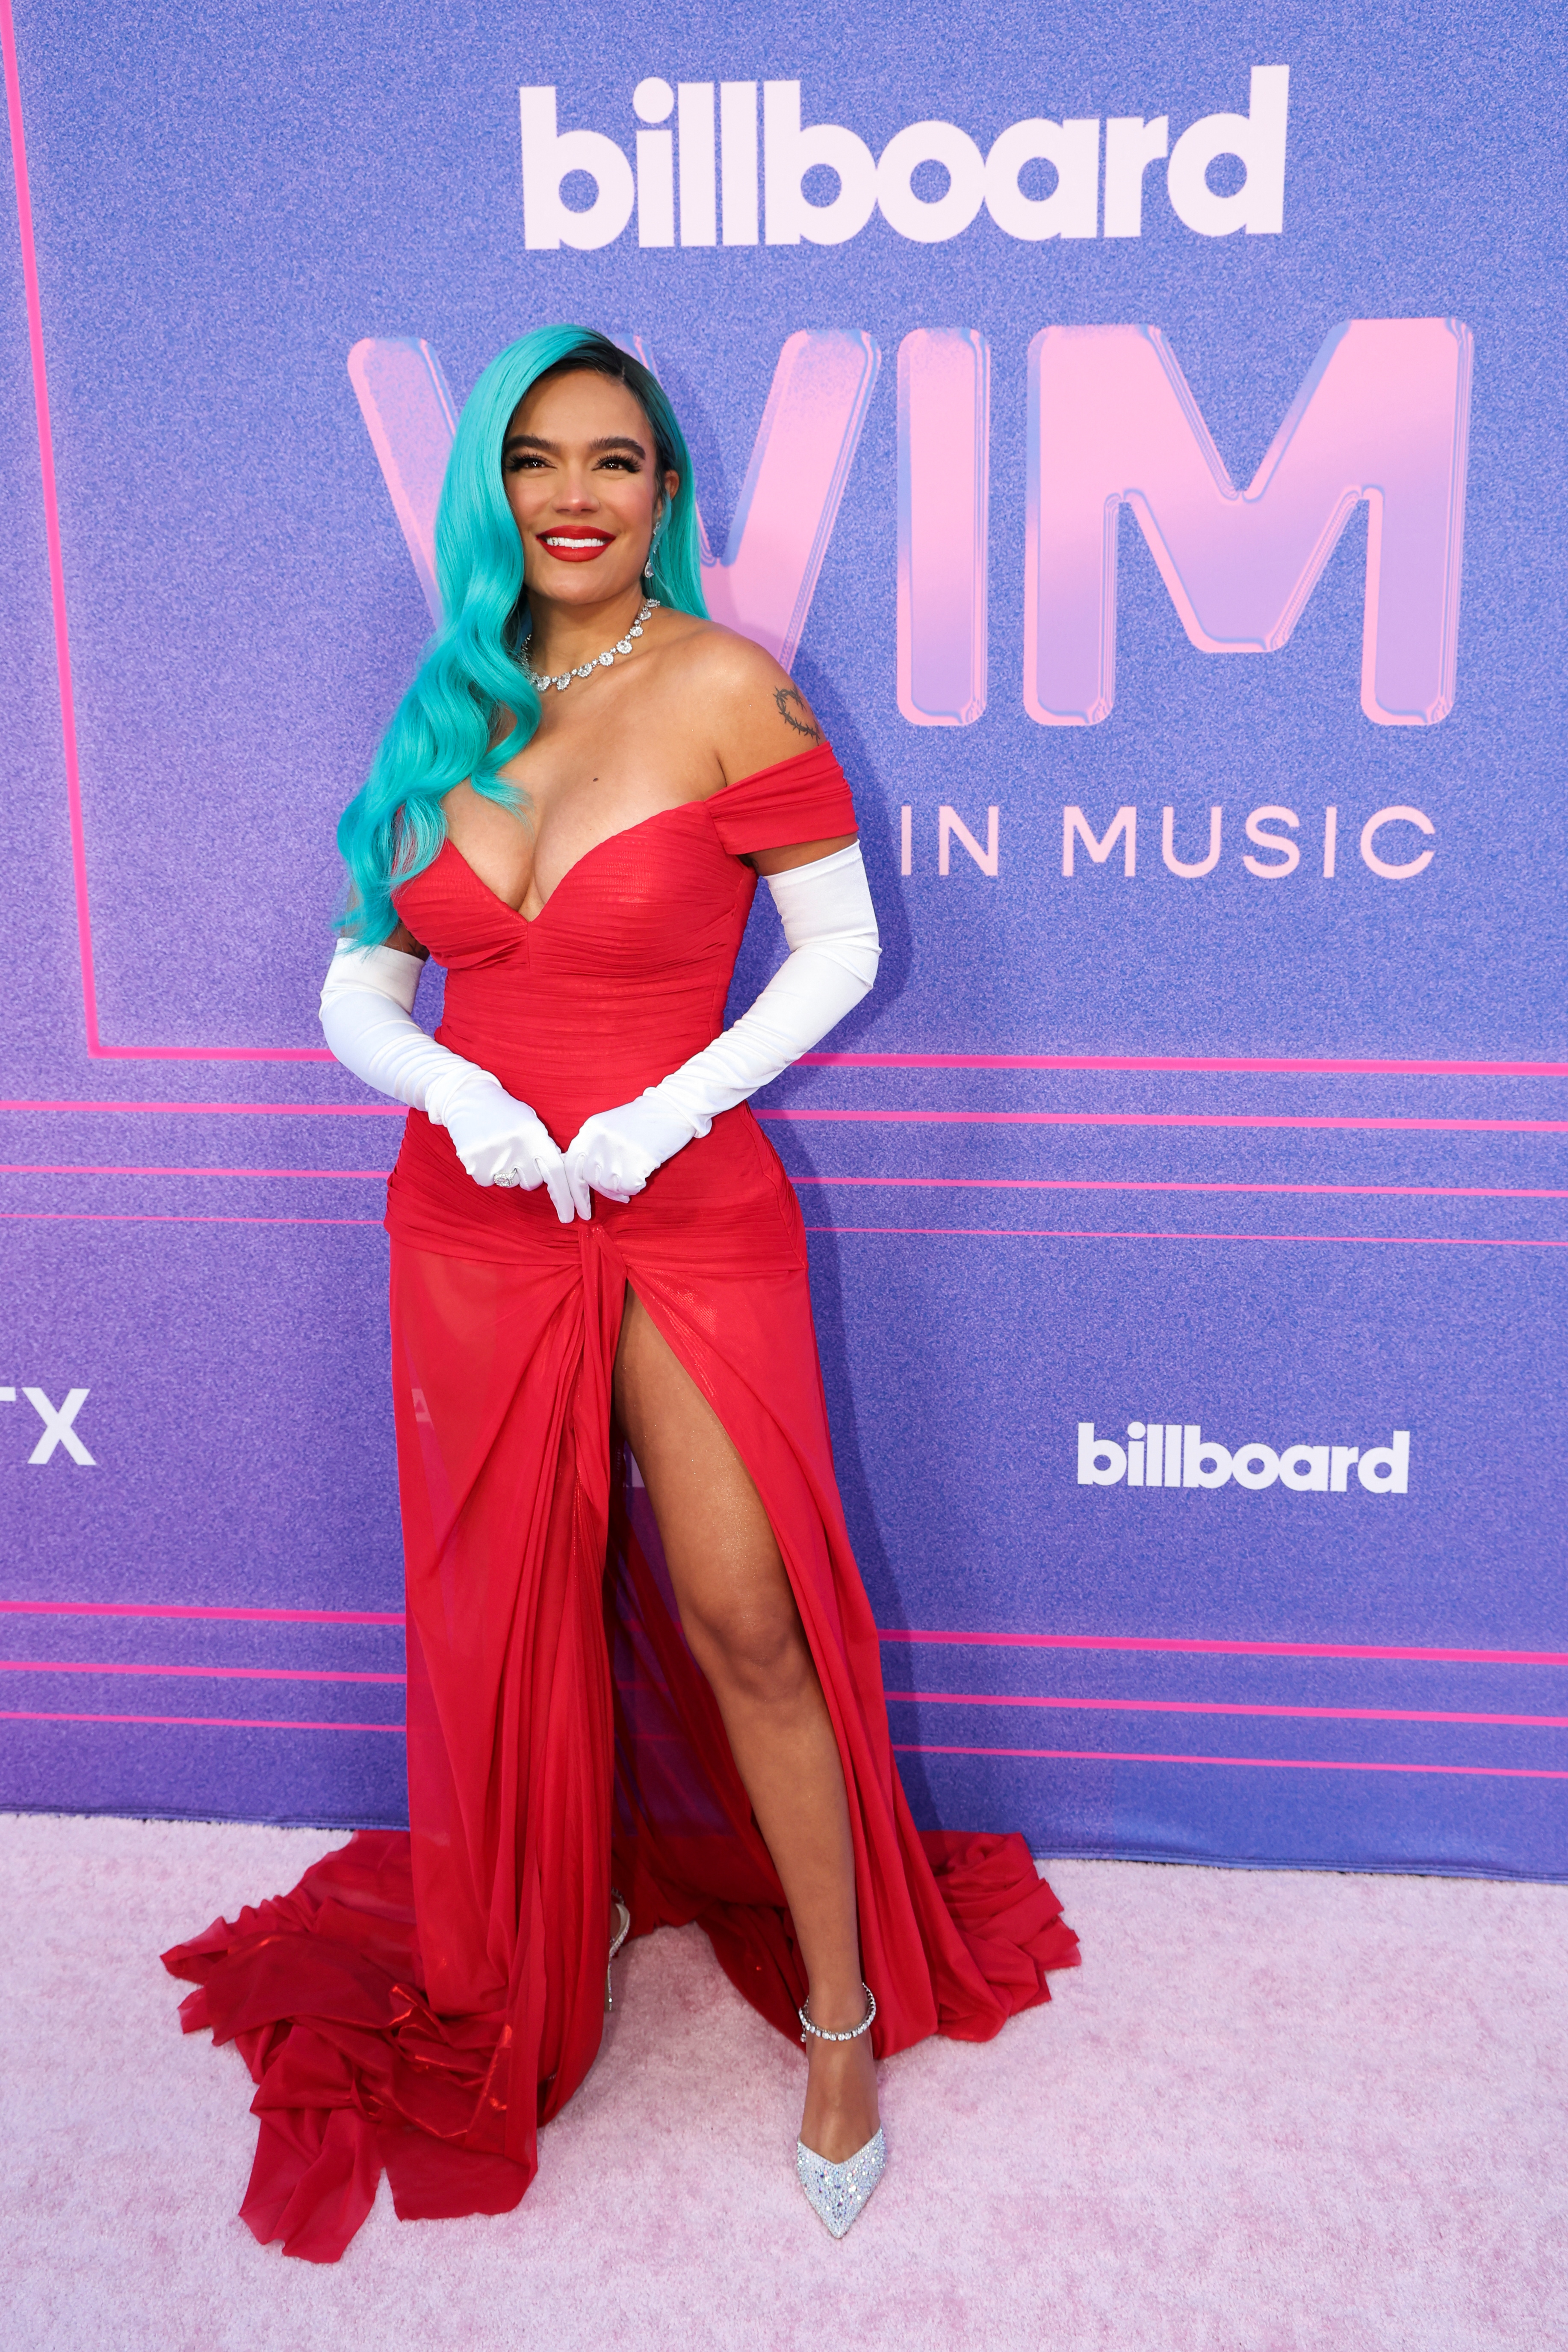 Singer Karol G attends the Billboard Women in Music Awards at YouTube Theater in Inglewood, California, U.S., March 2, 2022. REUTERS/Mario Anzuoni